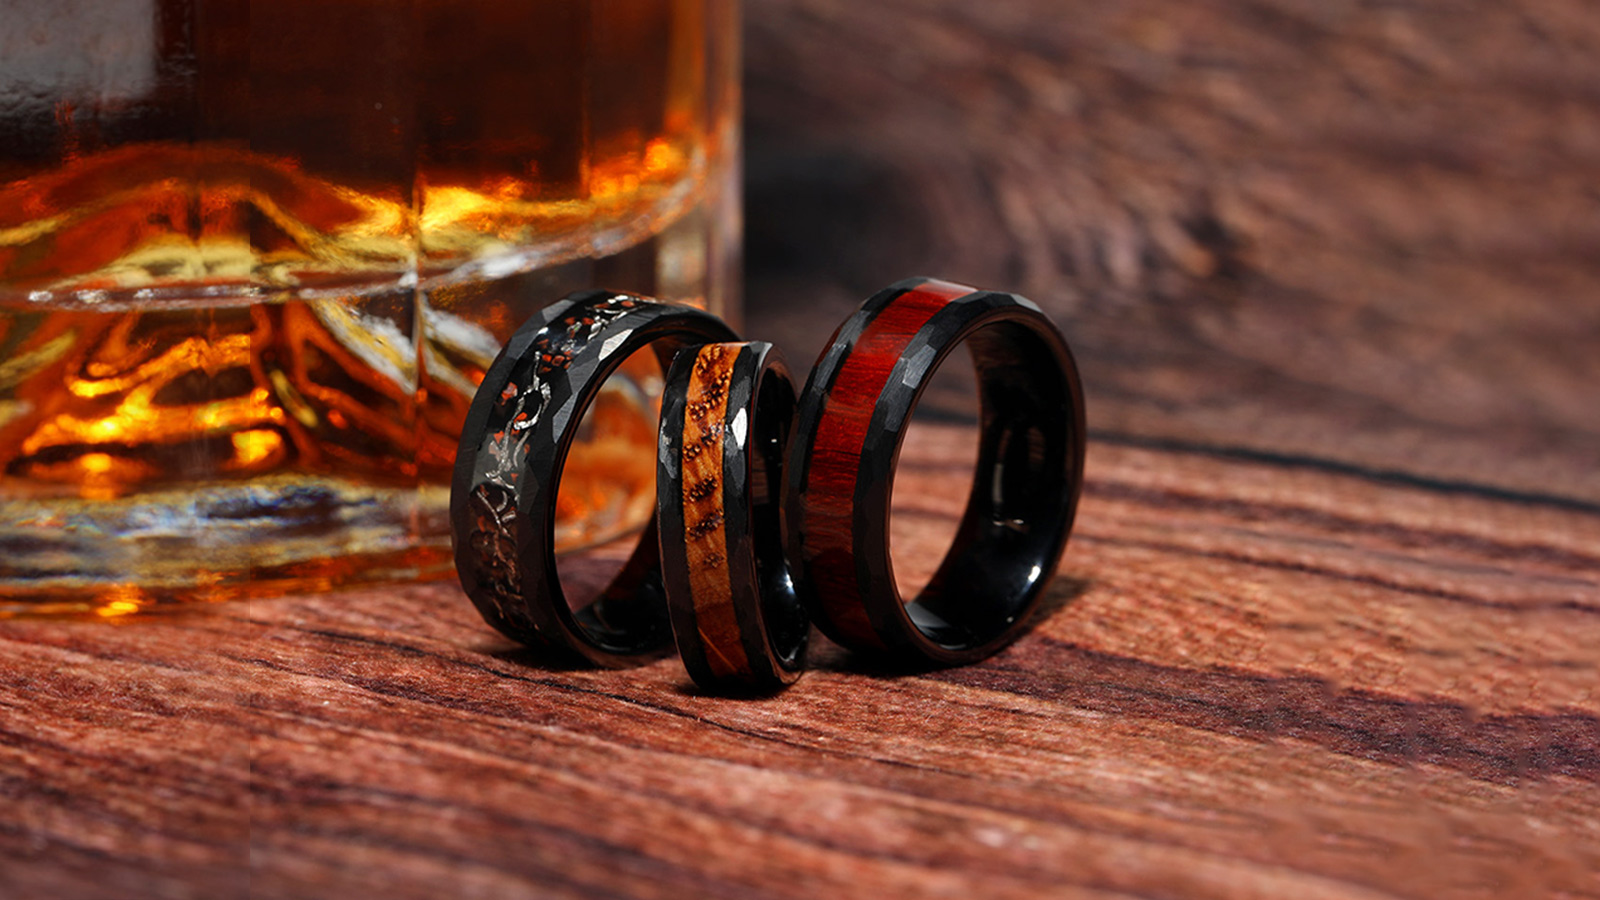 Three black men's wedding rings, with various inlays, were placed on a wooden table